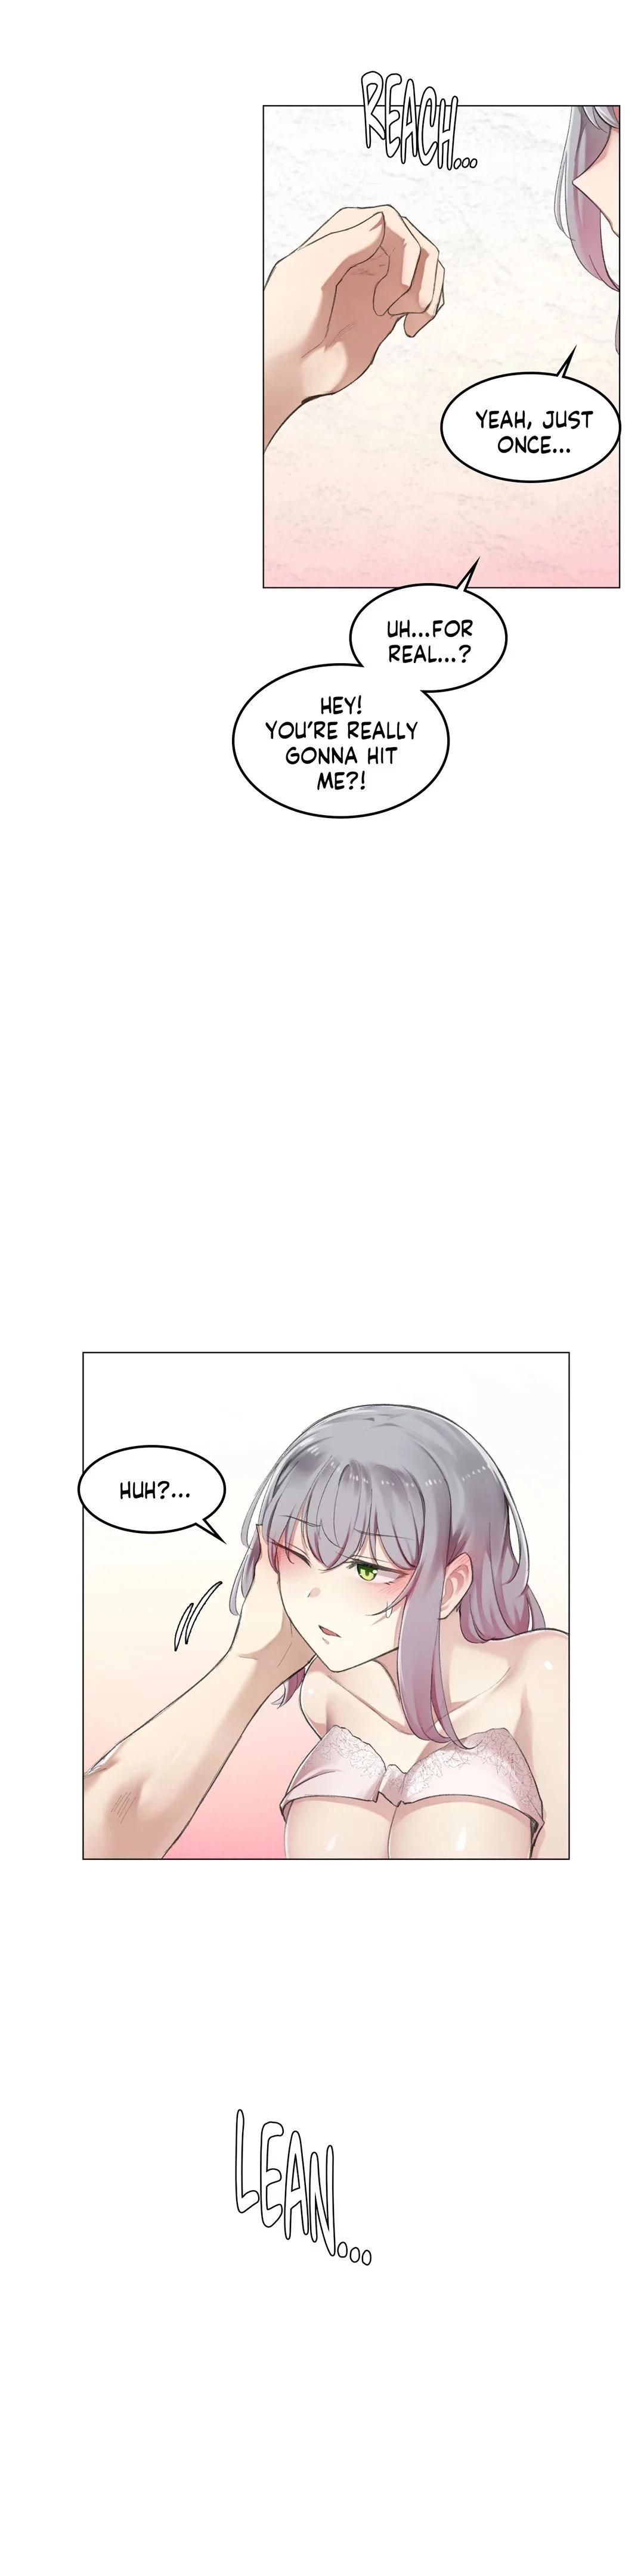 [Dumangoon, KONG_] Sexcape Room: Snap Off Ch.7/7 [English] [Manhwa PDF] Completed 191